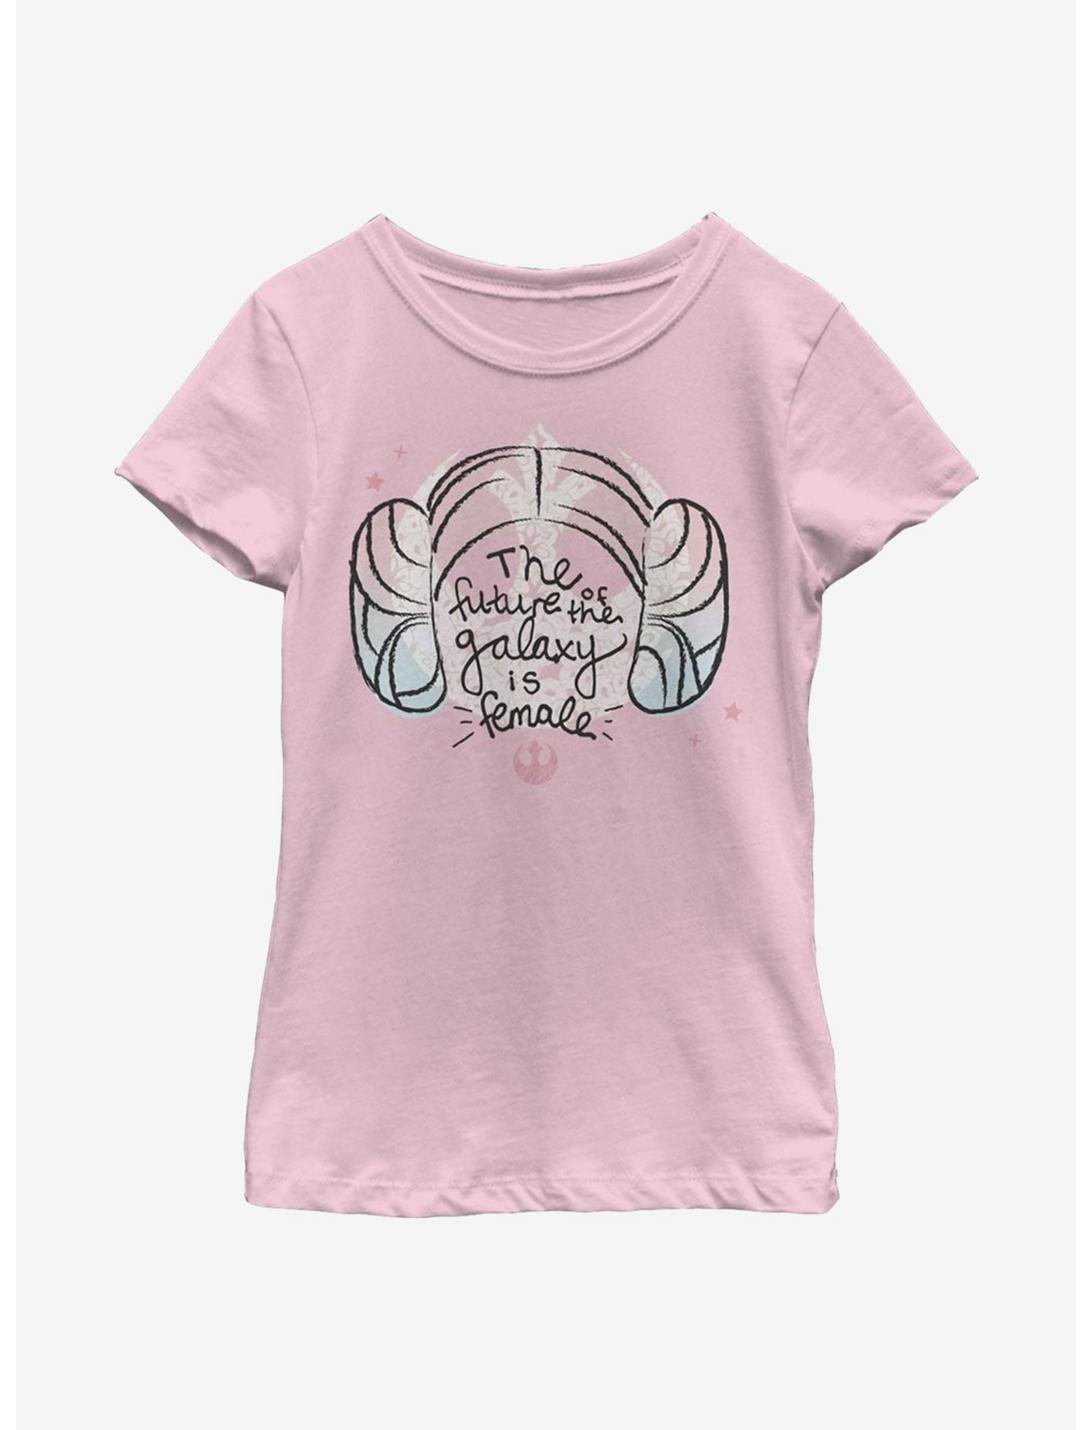 Star Wars The Future Youth Girls T-Shirt, PINK, hi-res